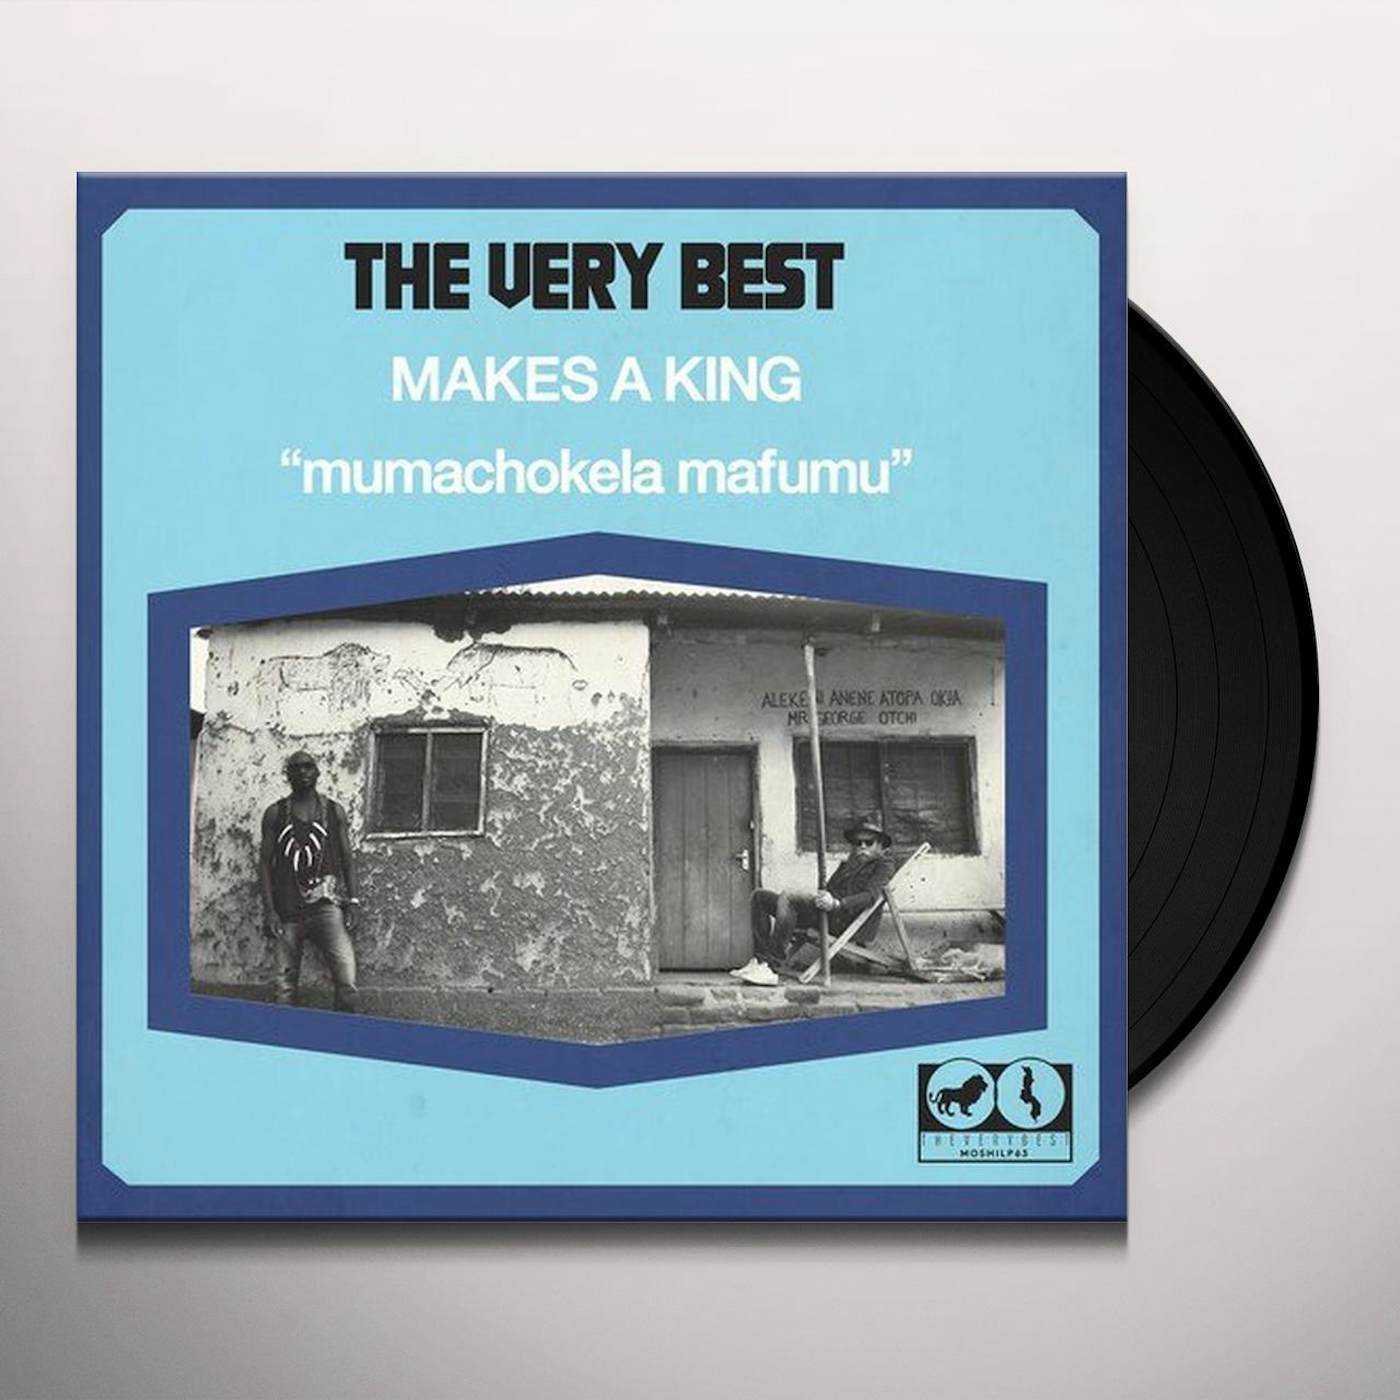 The Very Best Makes a King Vinyl Record